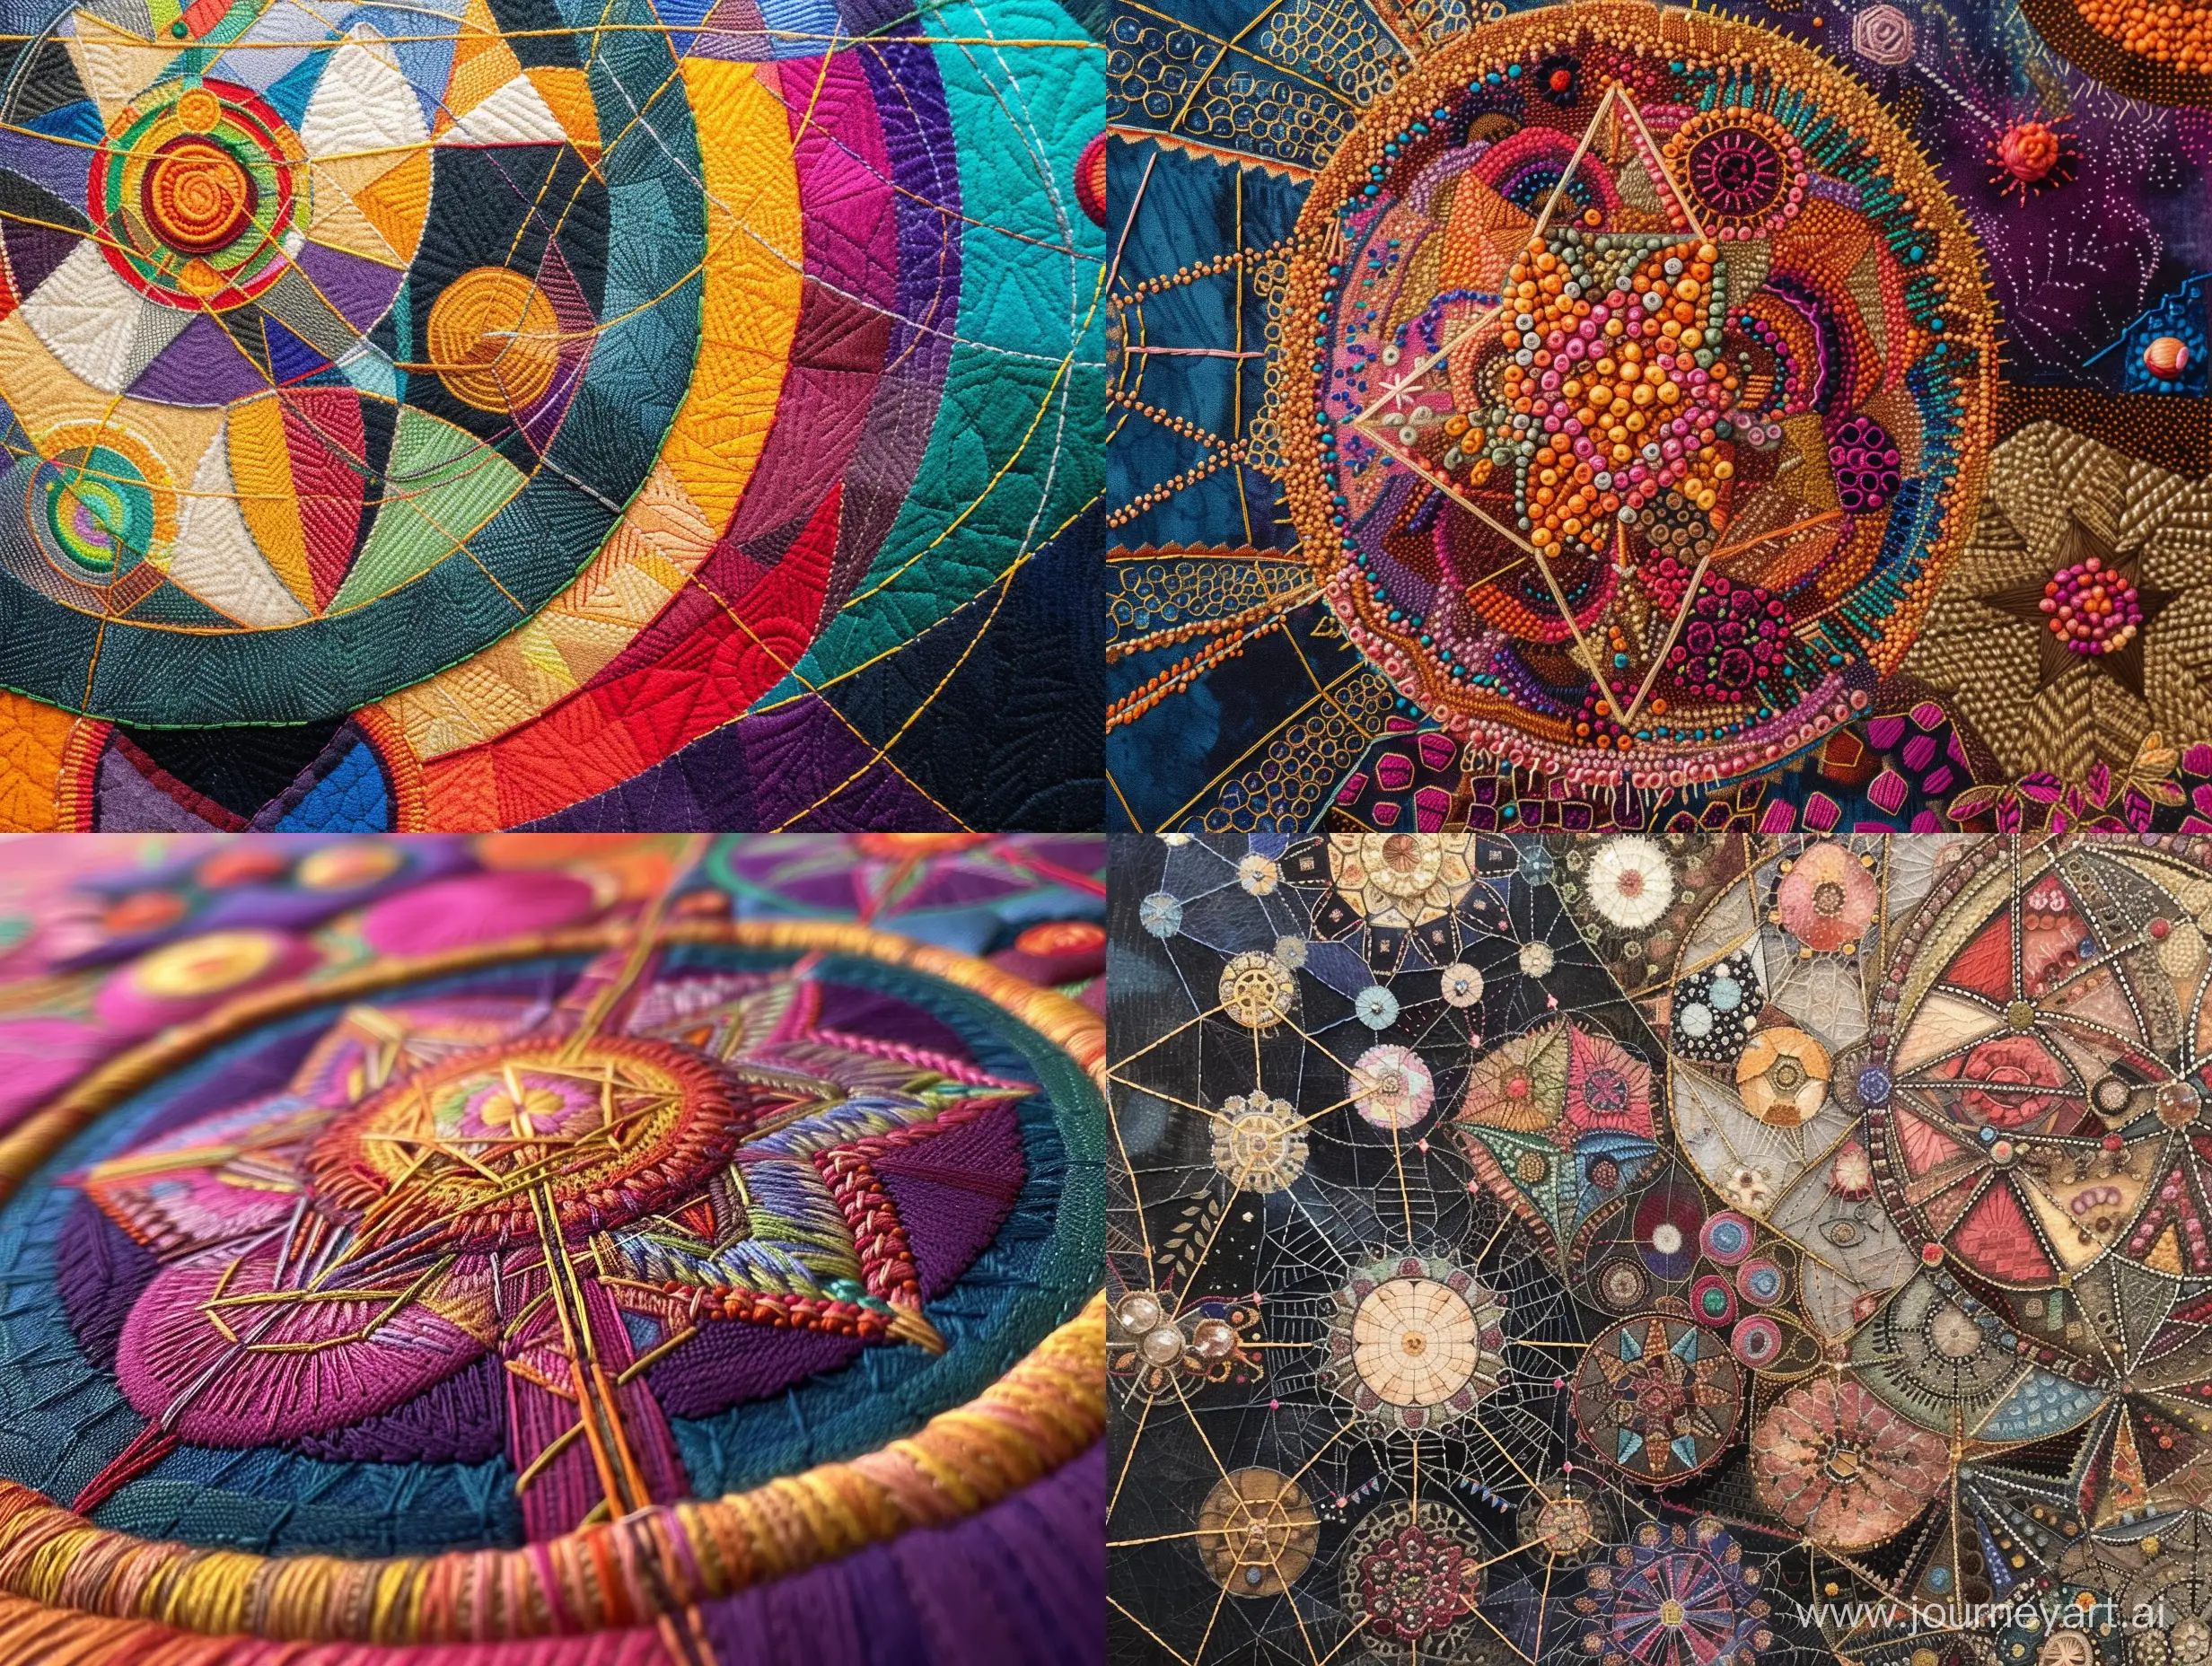 Unlock multiple dimensions, mathematical perfection, metaphysical enlightenment, in an elaborate embroidery.